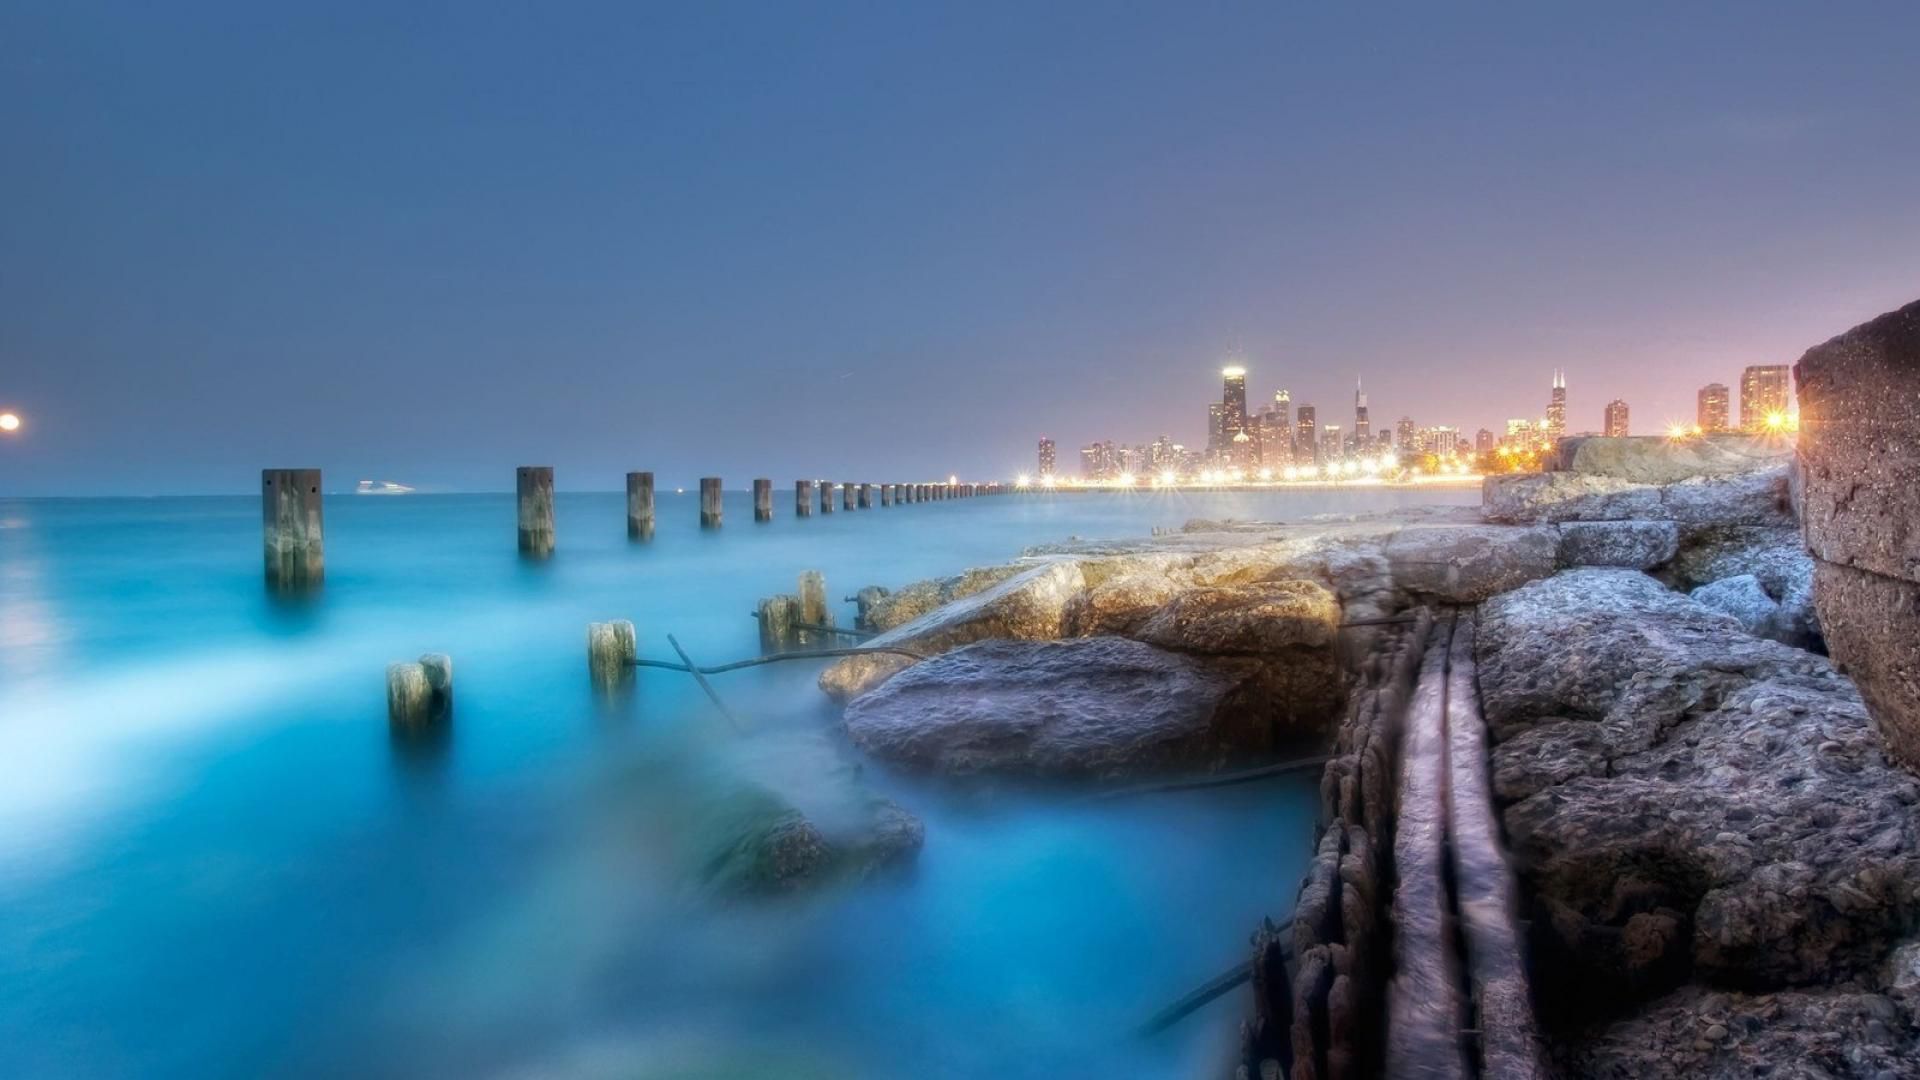 Breath-taking Cityscapes from Around the World 